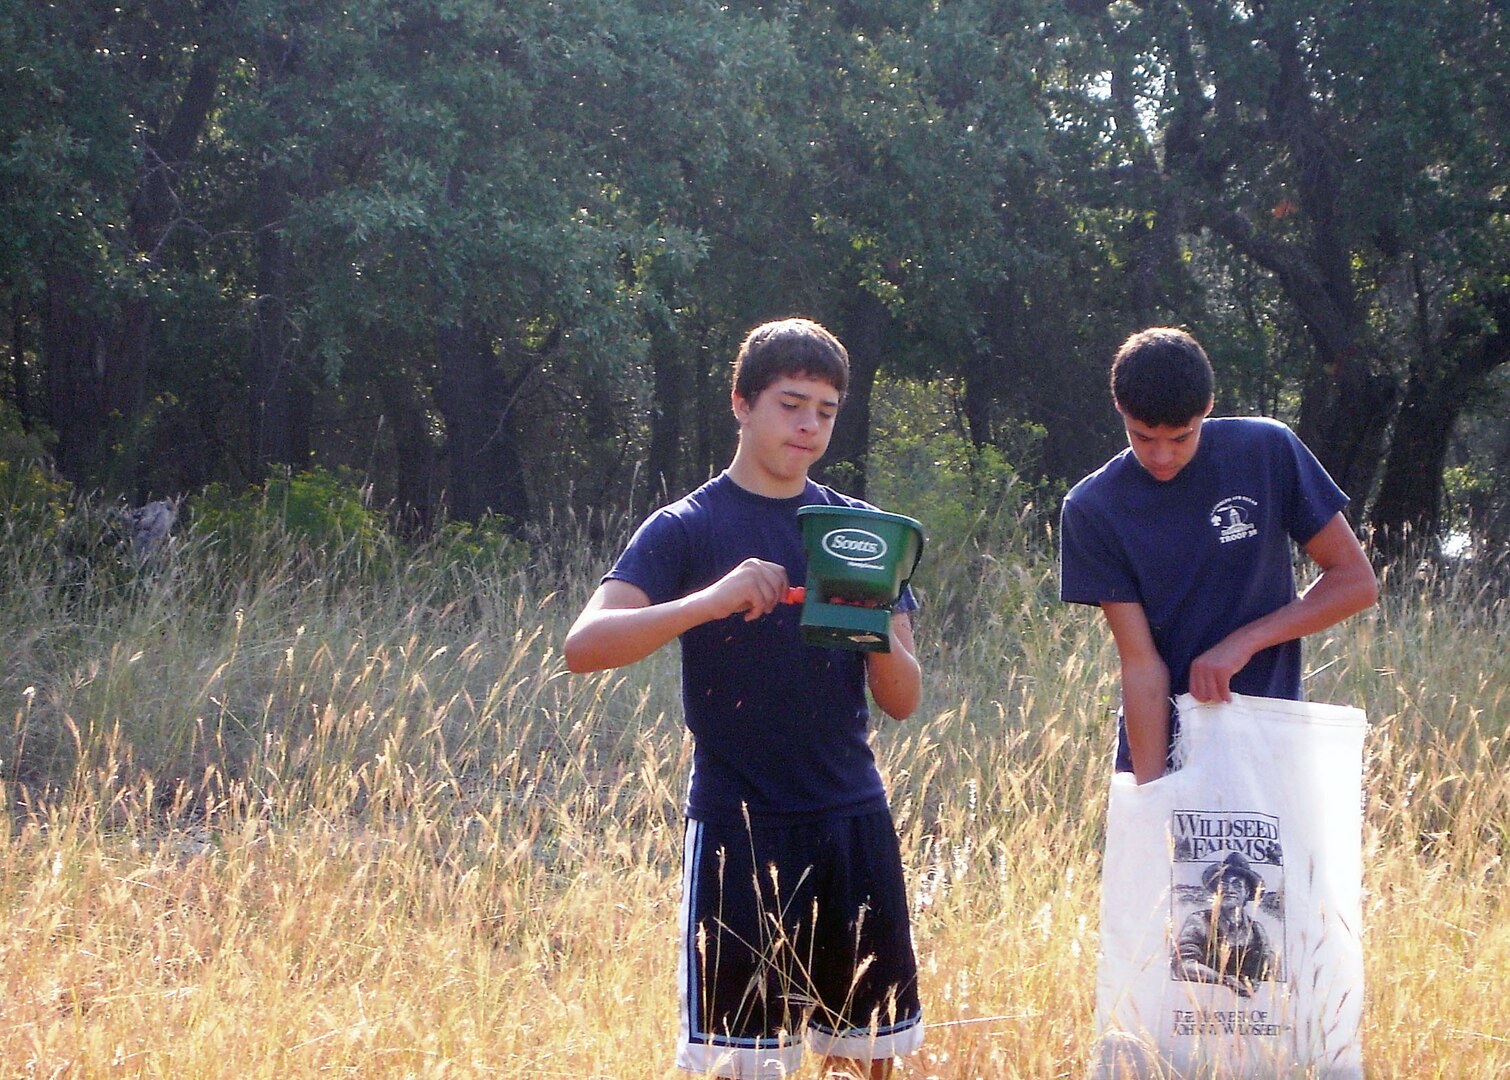 Justin Ulrich (left), 16, and Ricky Trevi?o, 17, were among 12 Randolph Boy Scouts who planted wildflower seeds at Canyon Lake Recreation Area on Sept. 27 in support of National Public Lands Day. Each year, Randolph Air Force Base applies for ?Legacy Funding? to complete a service project and, this year, was awarded $5,450 to fund the planting. (Courtesy photo) 